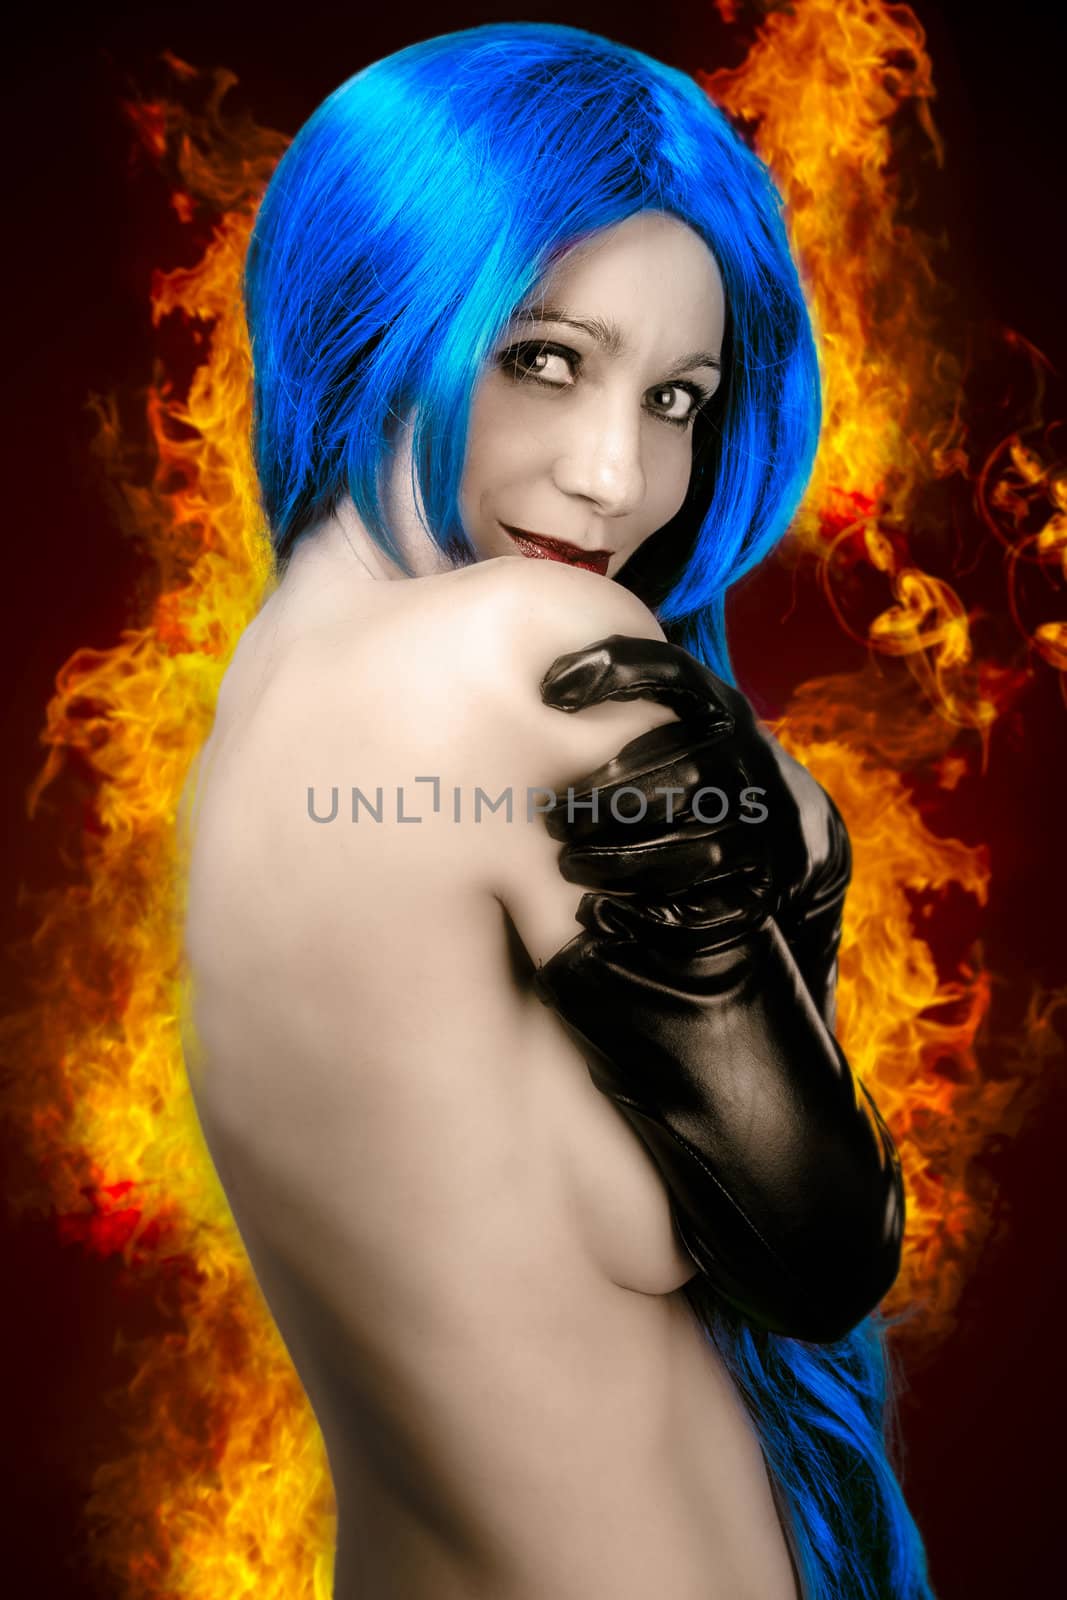 vogue style portrait of beautiful delicate woman with blue hair over fire flames